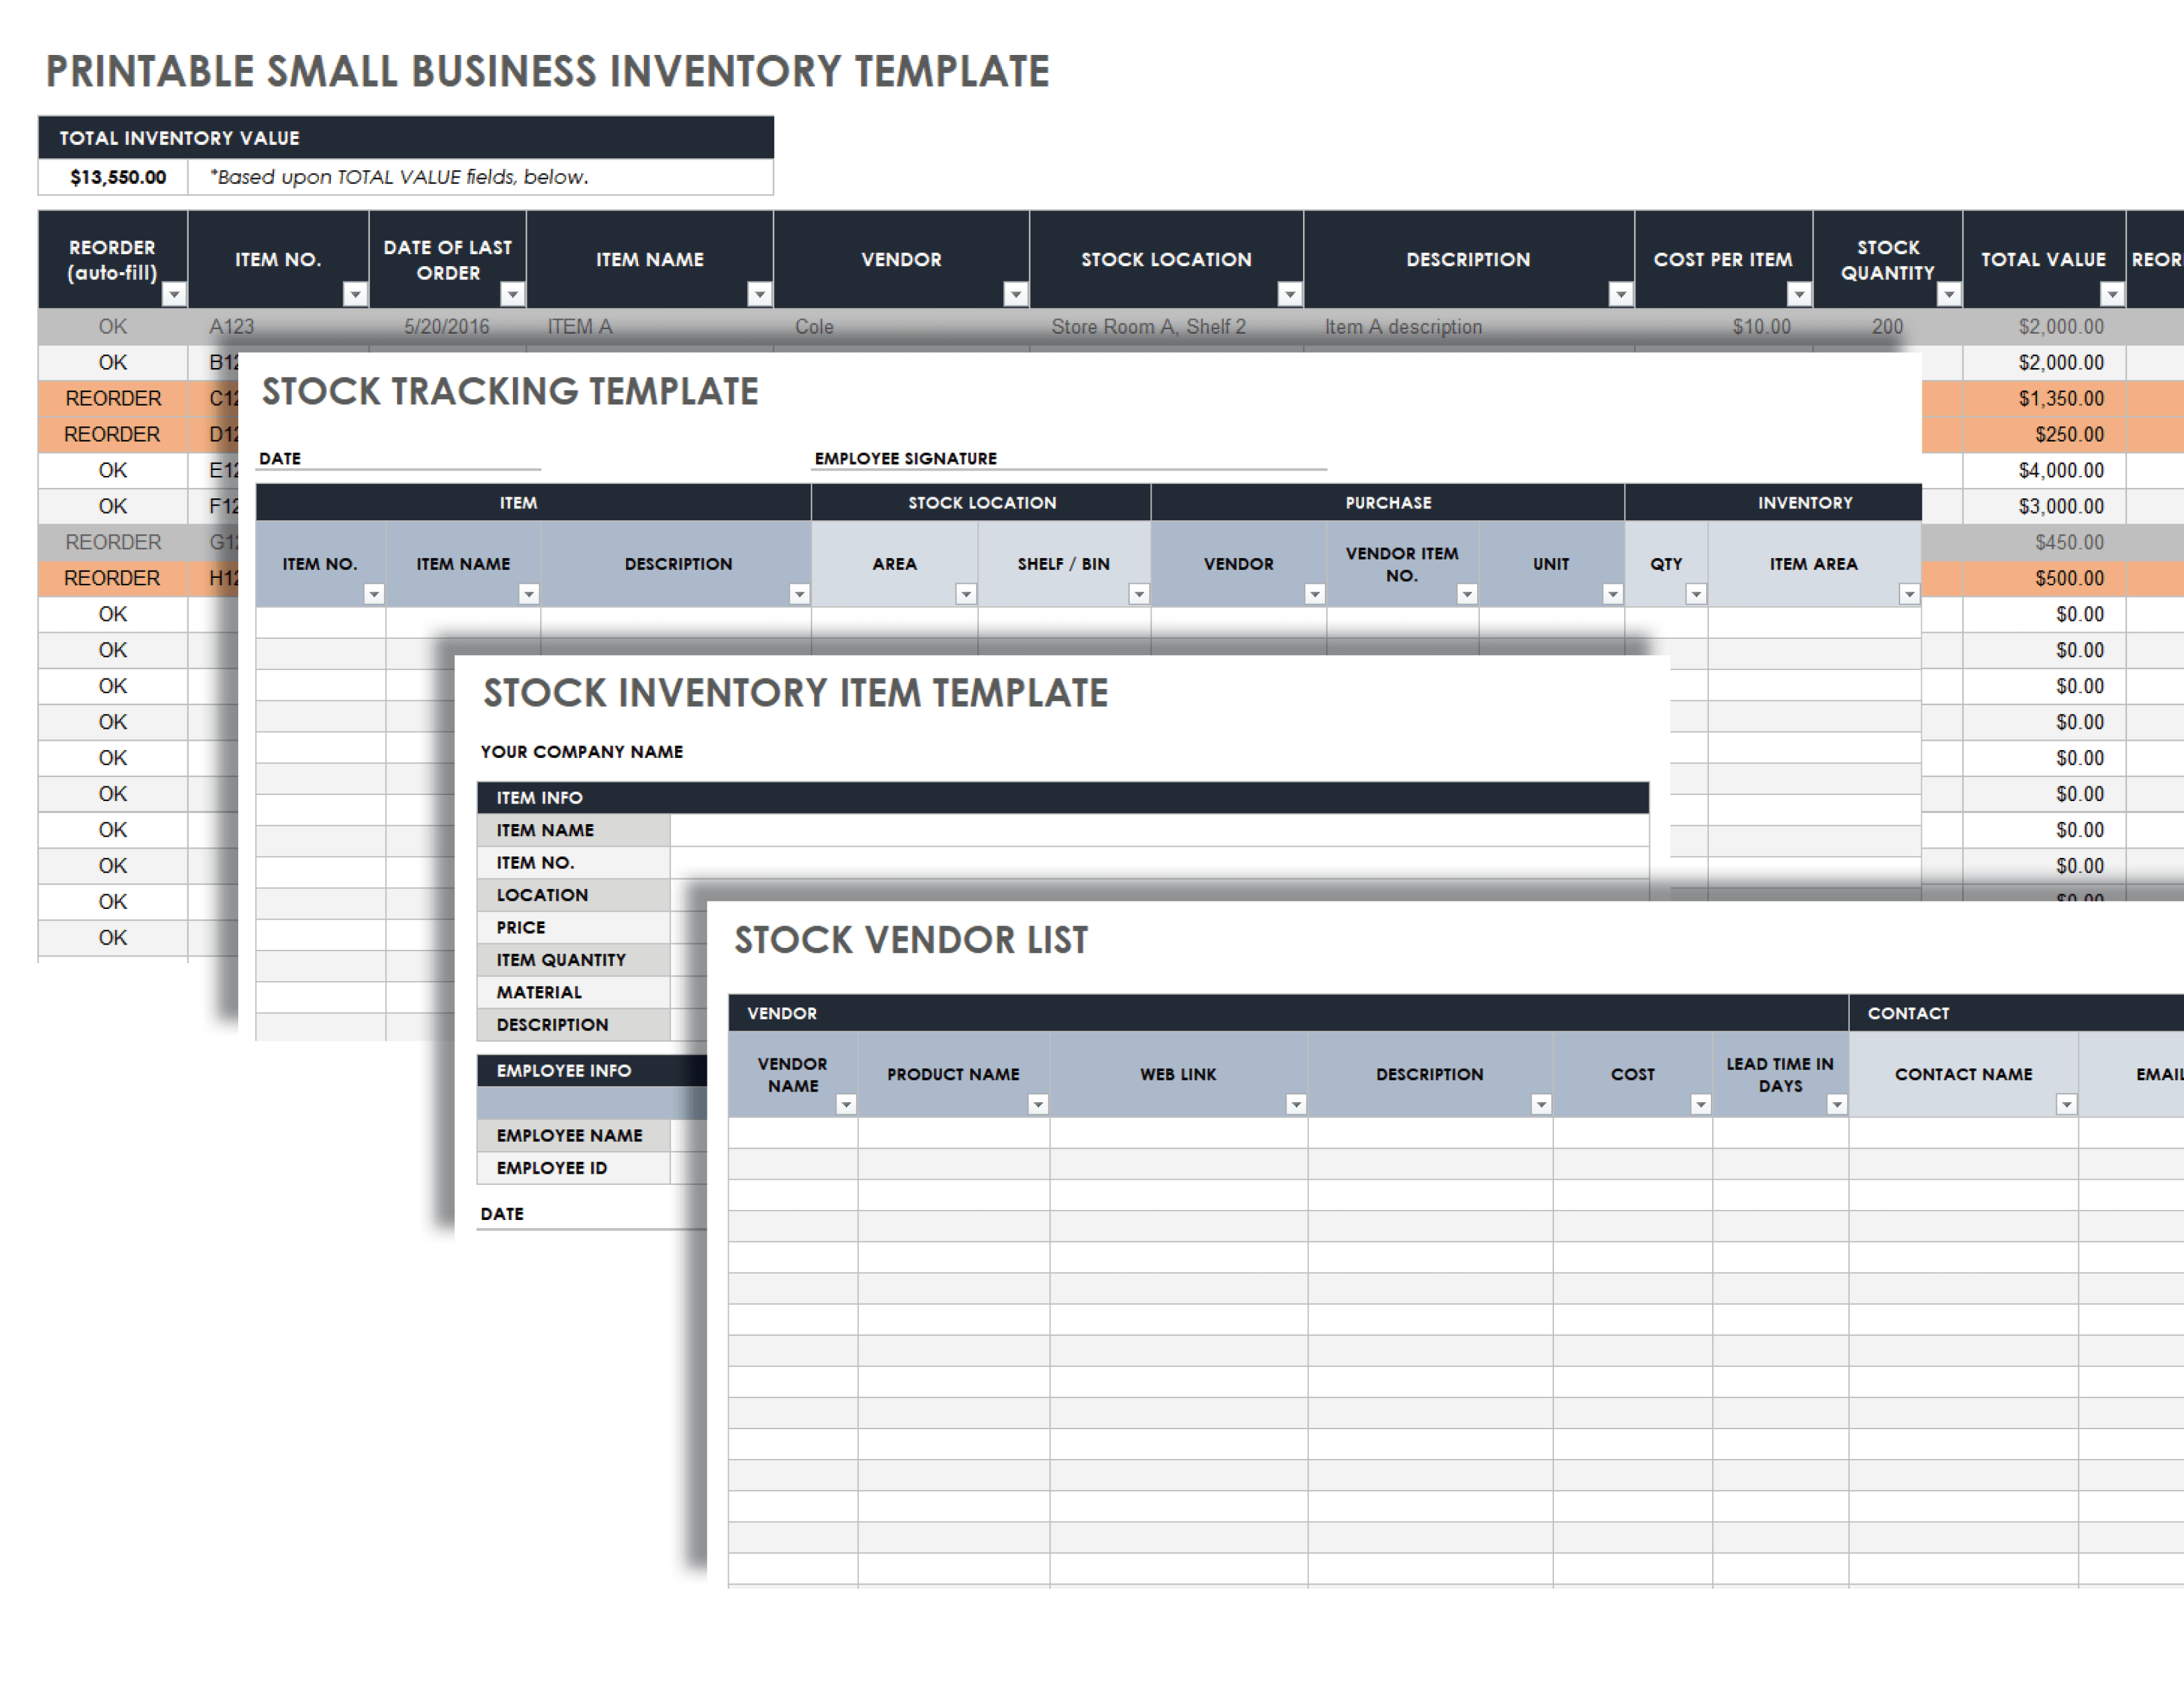 Printable Small Business Inventory Template